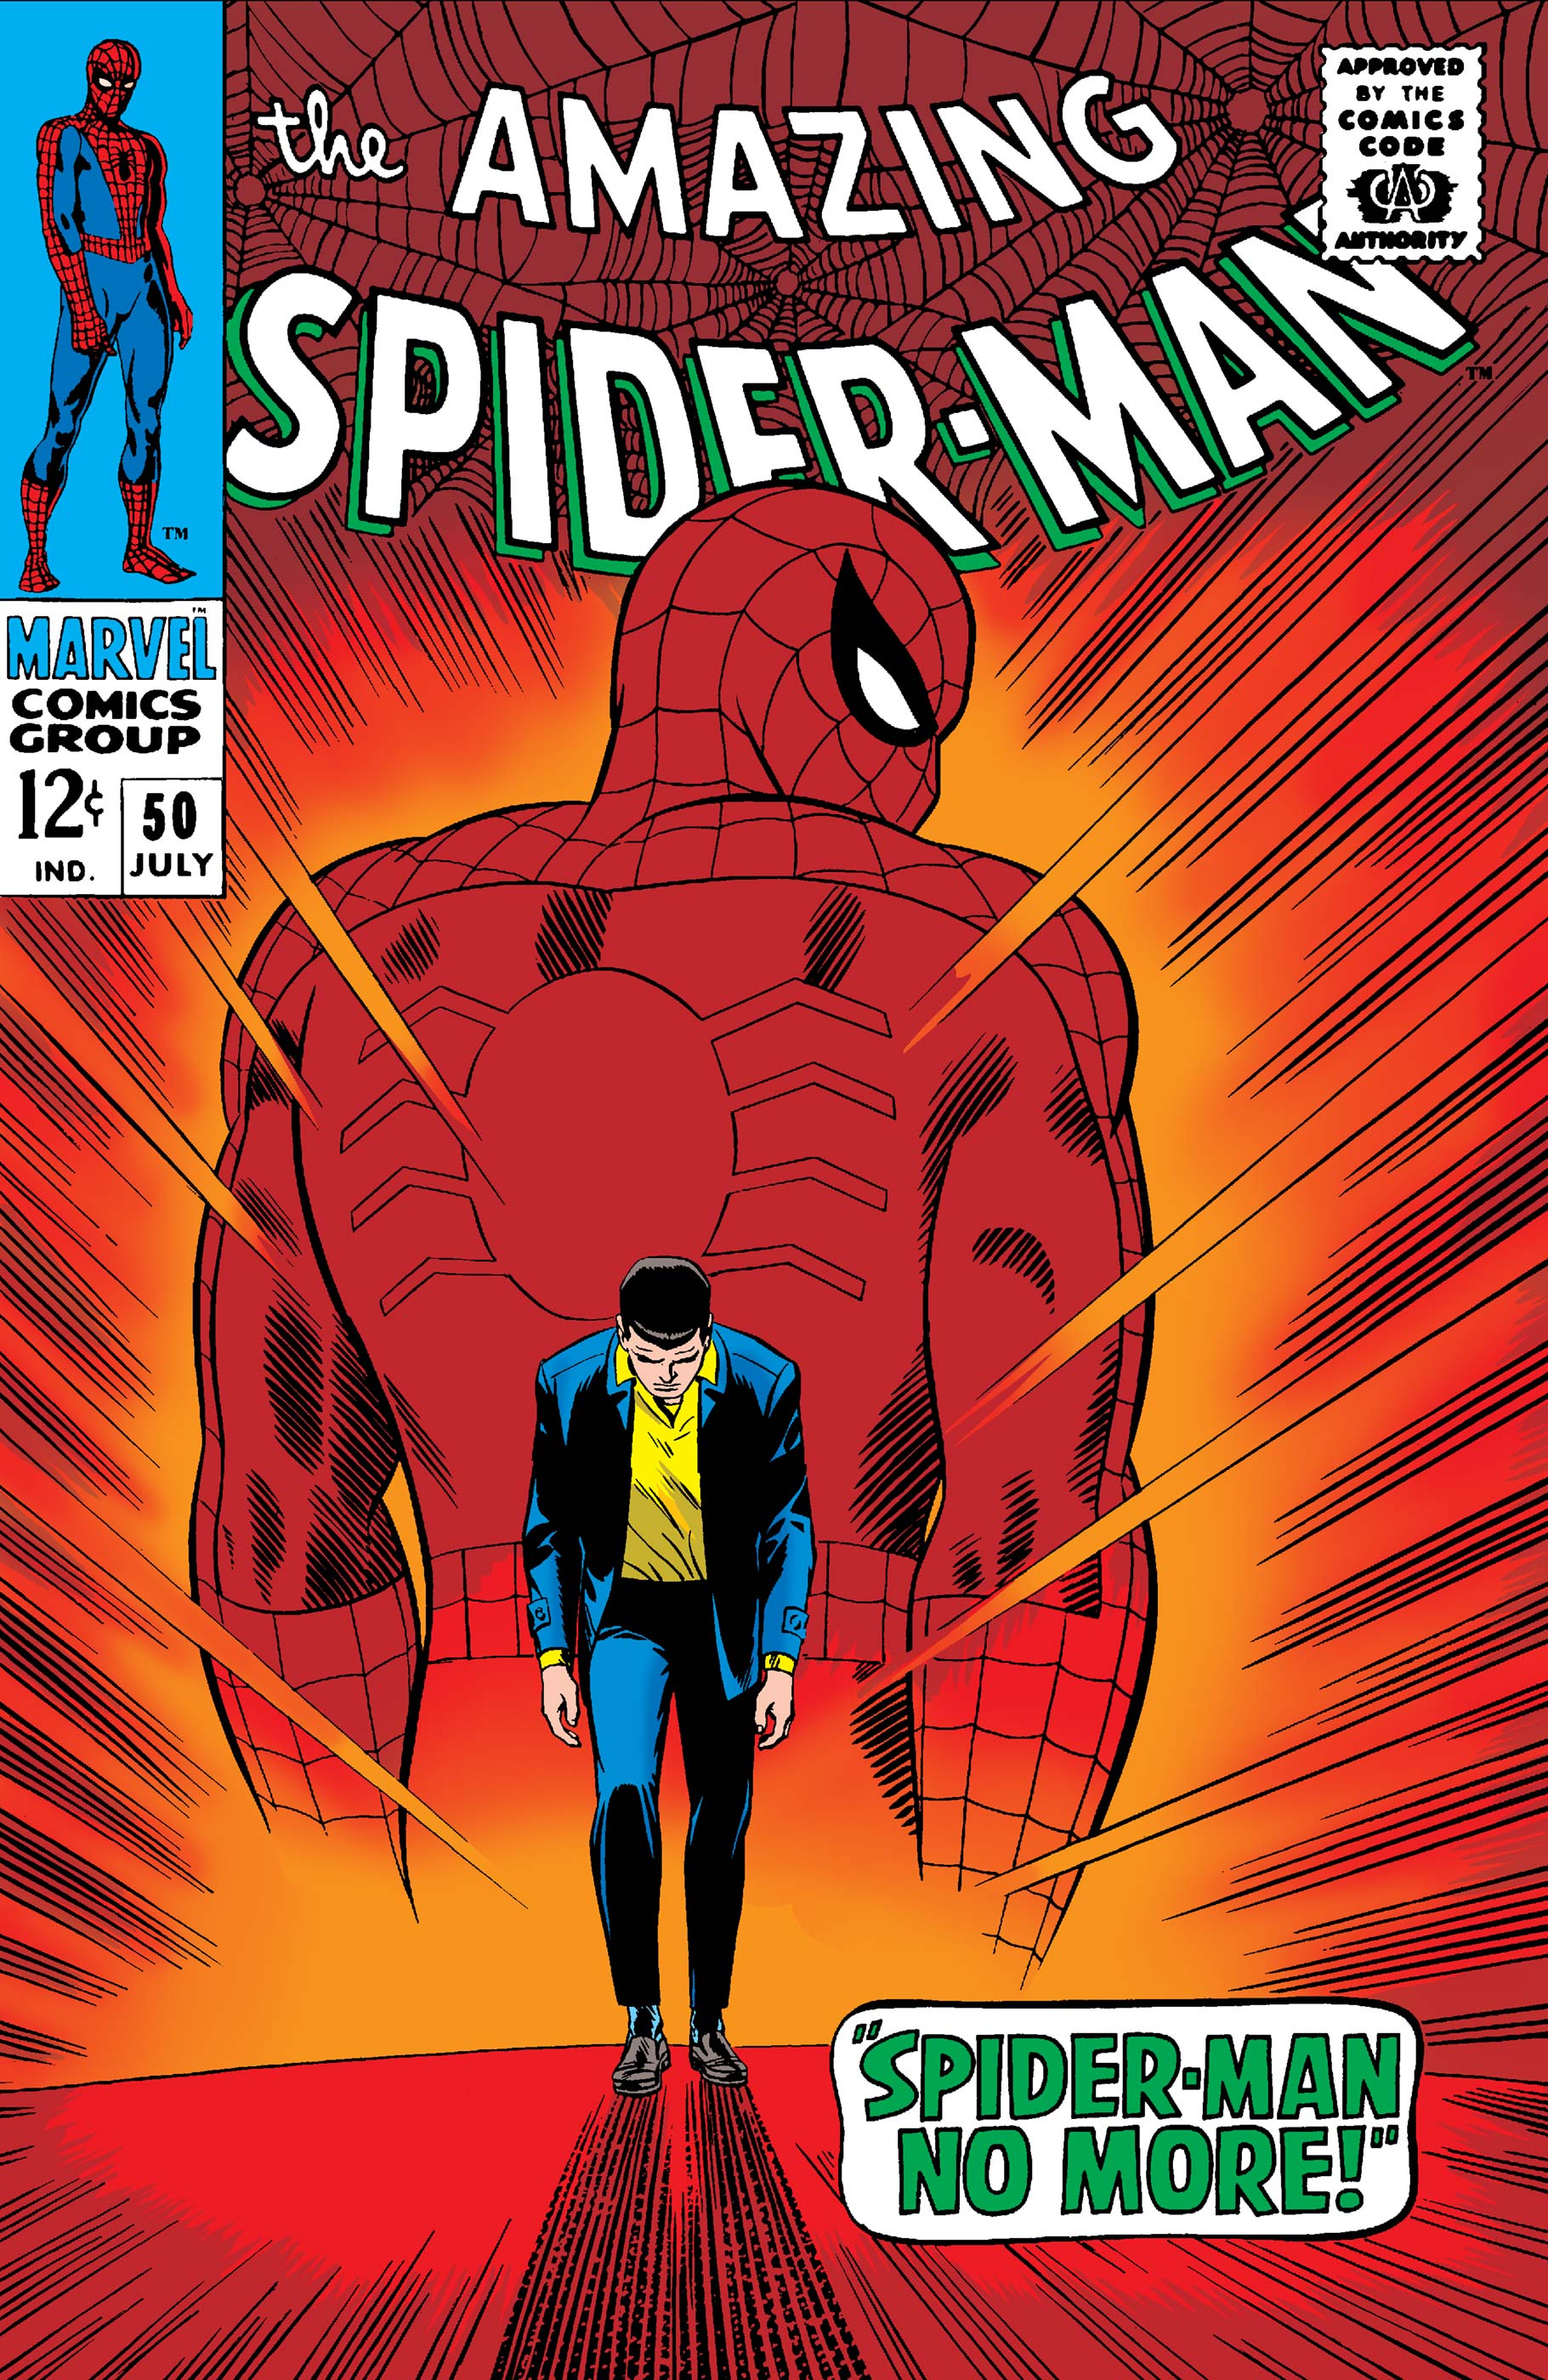 The Amazing Spider-Man (1963) #50 | Comic Issues | Marvel